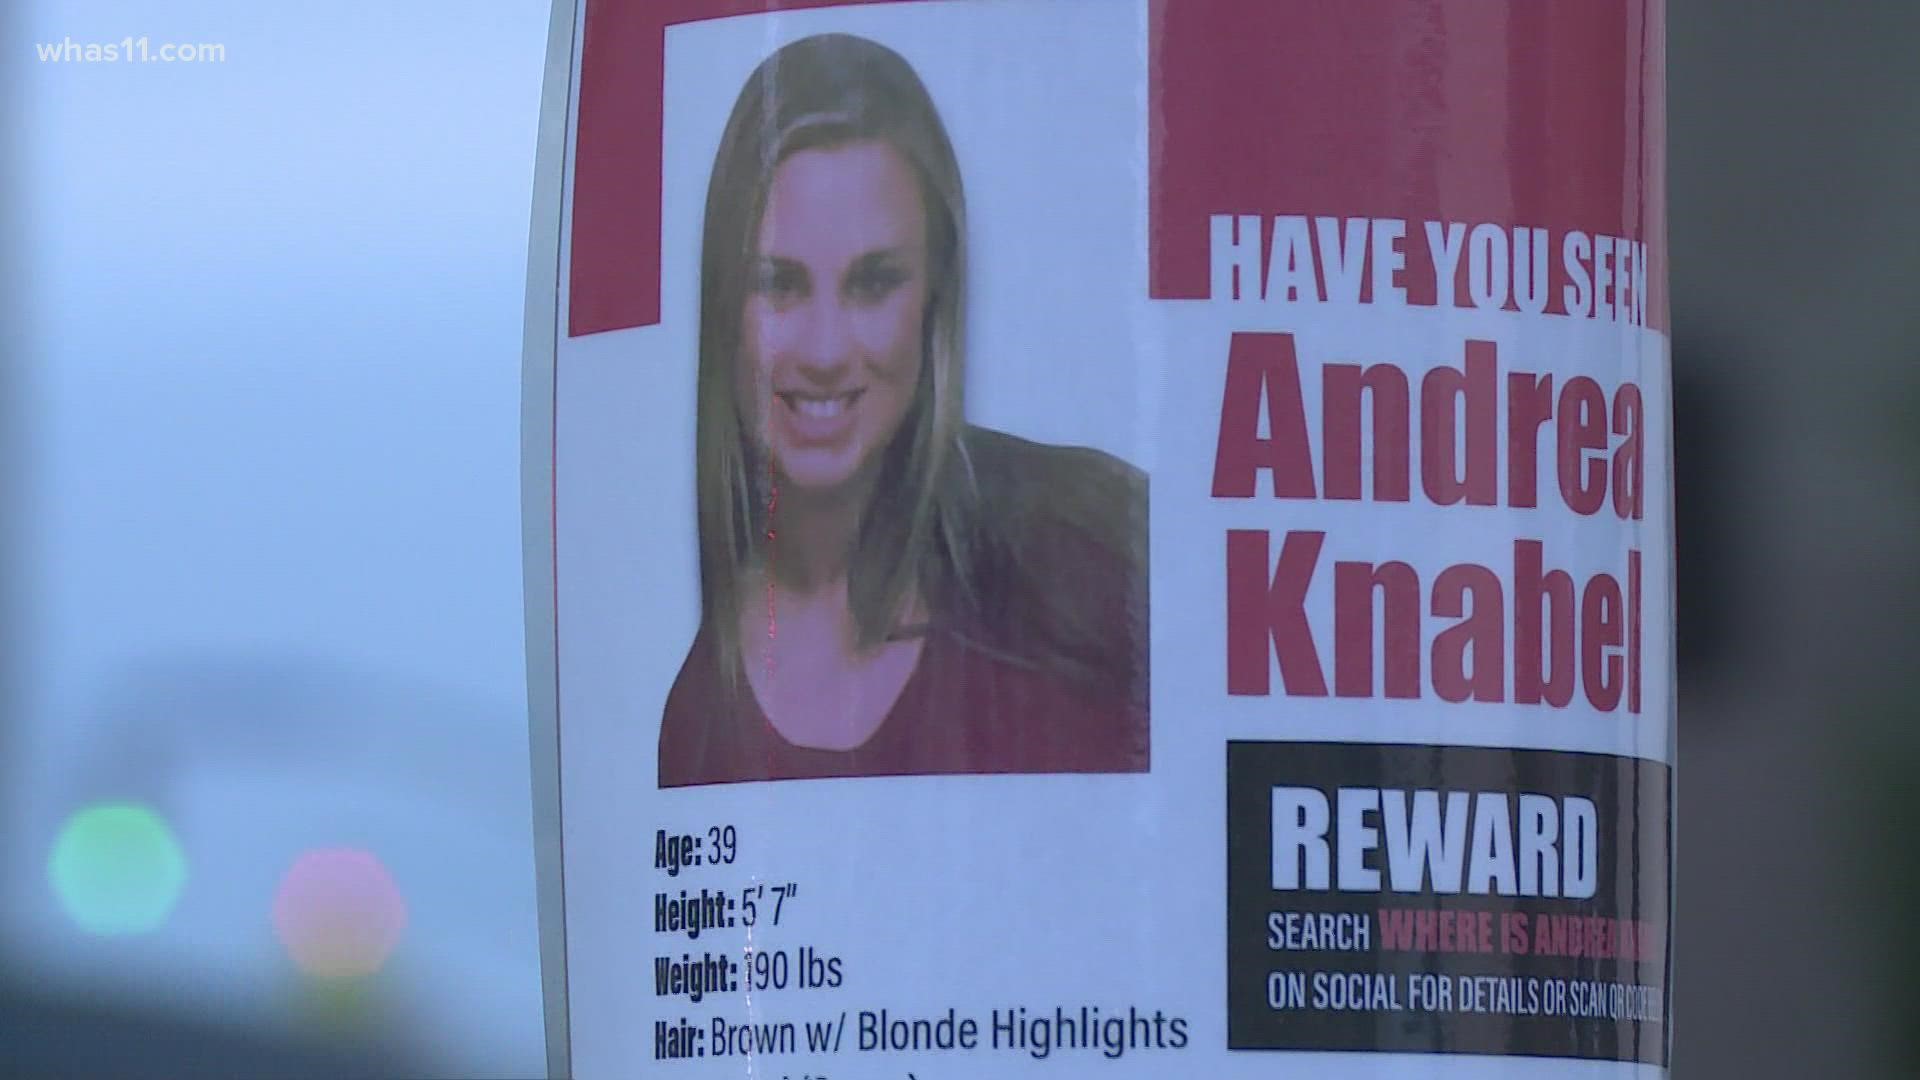 More than two years after her disappearance, the family of Louisville mom Andrea Knabel hasn't given up hope that they will find her alive.